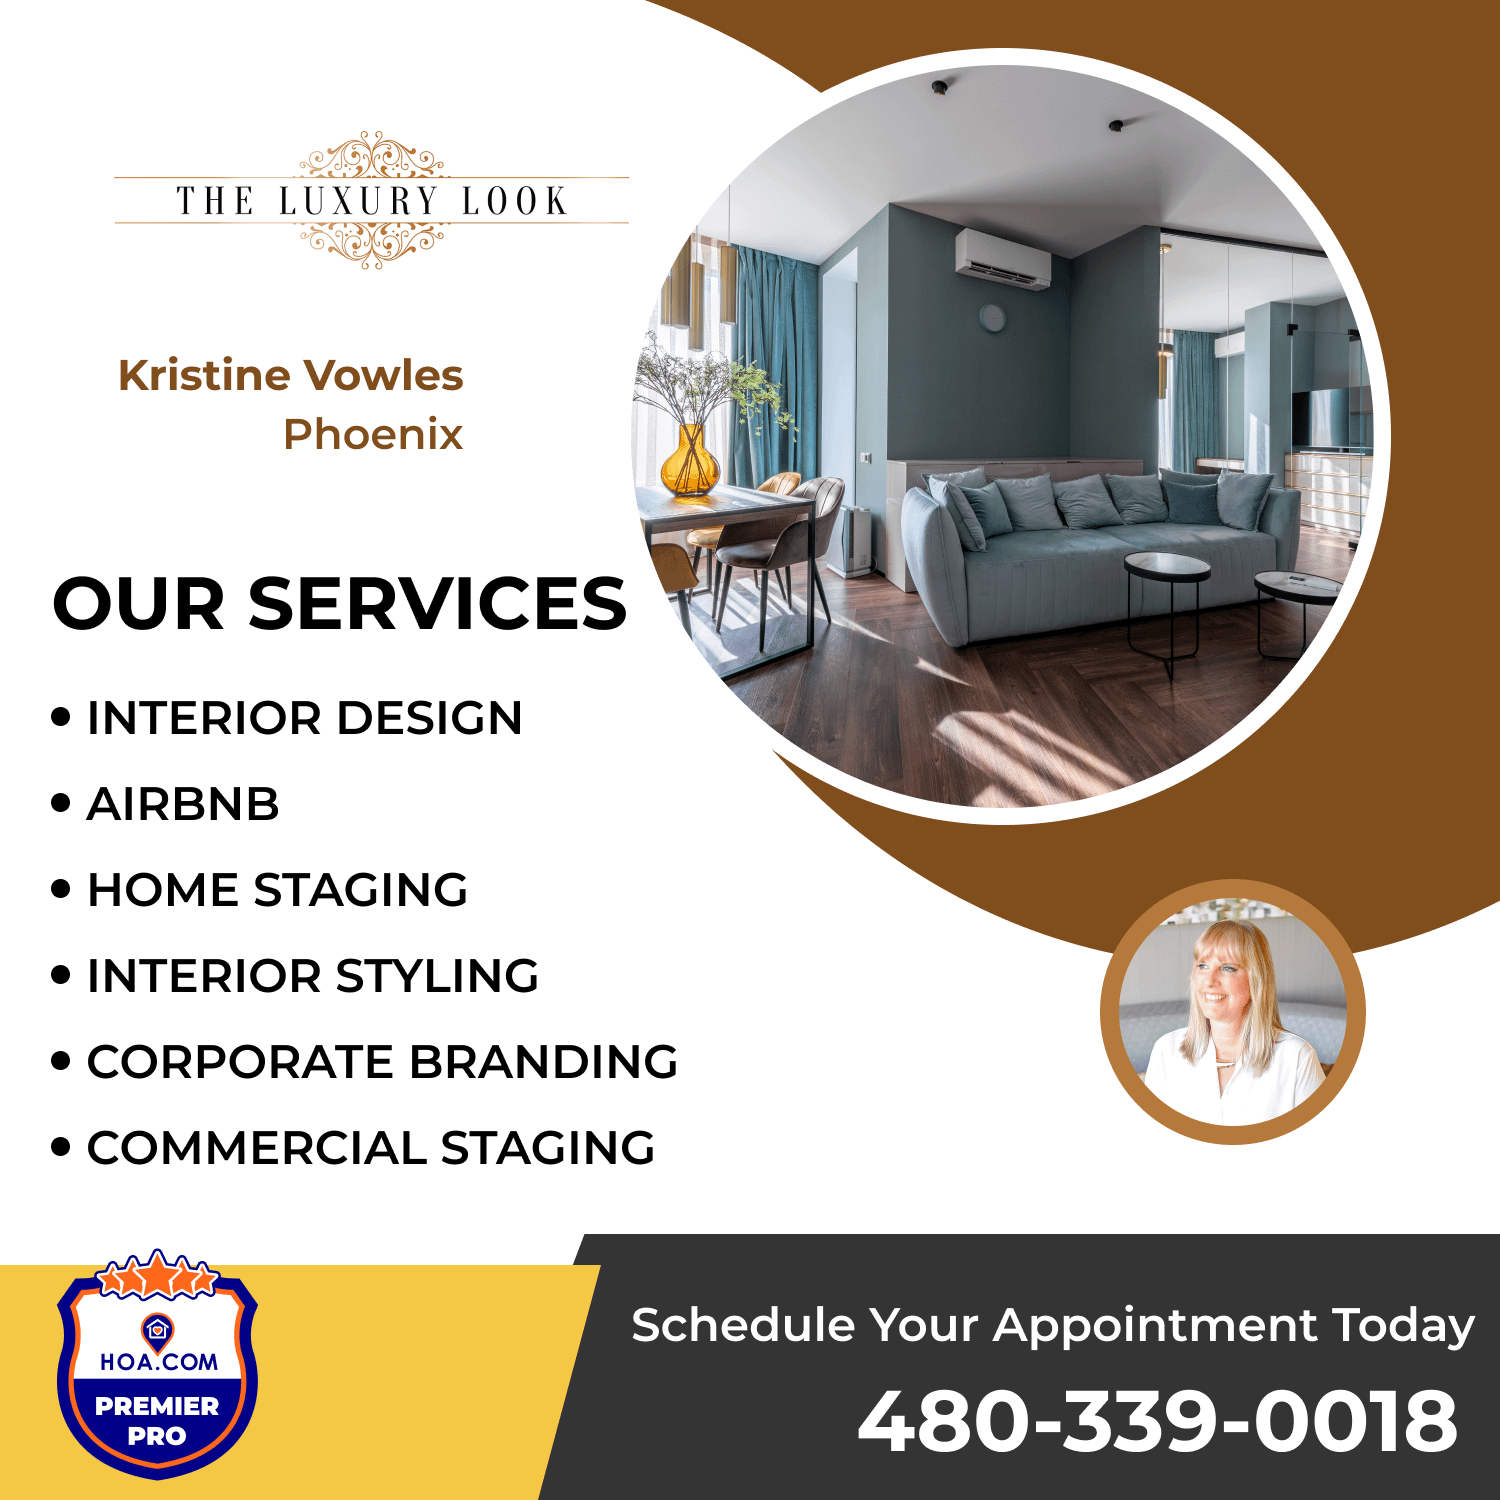 The Luxury Look Our Services